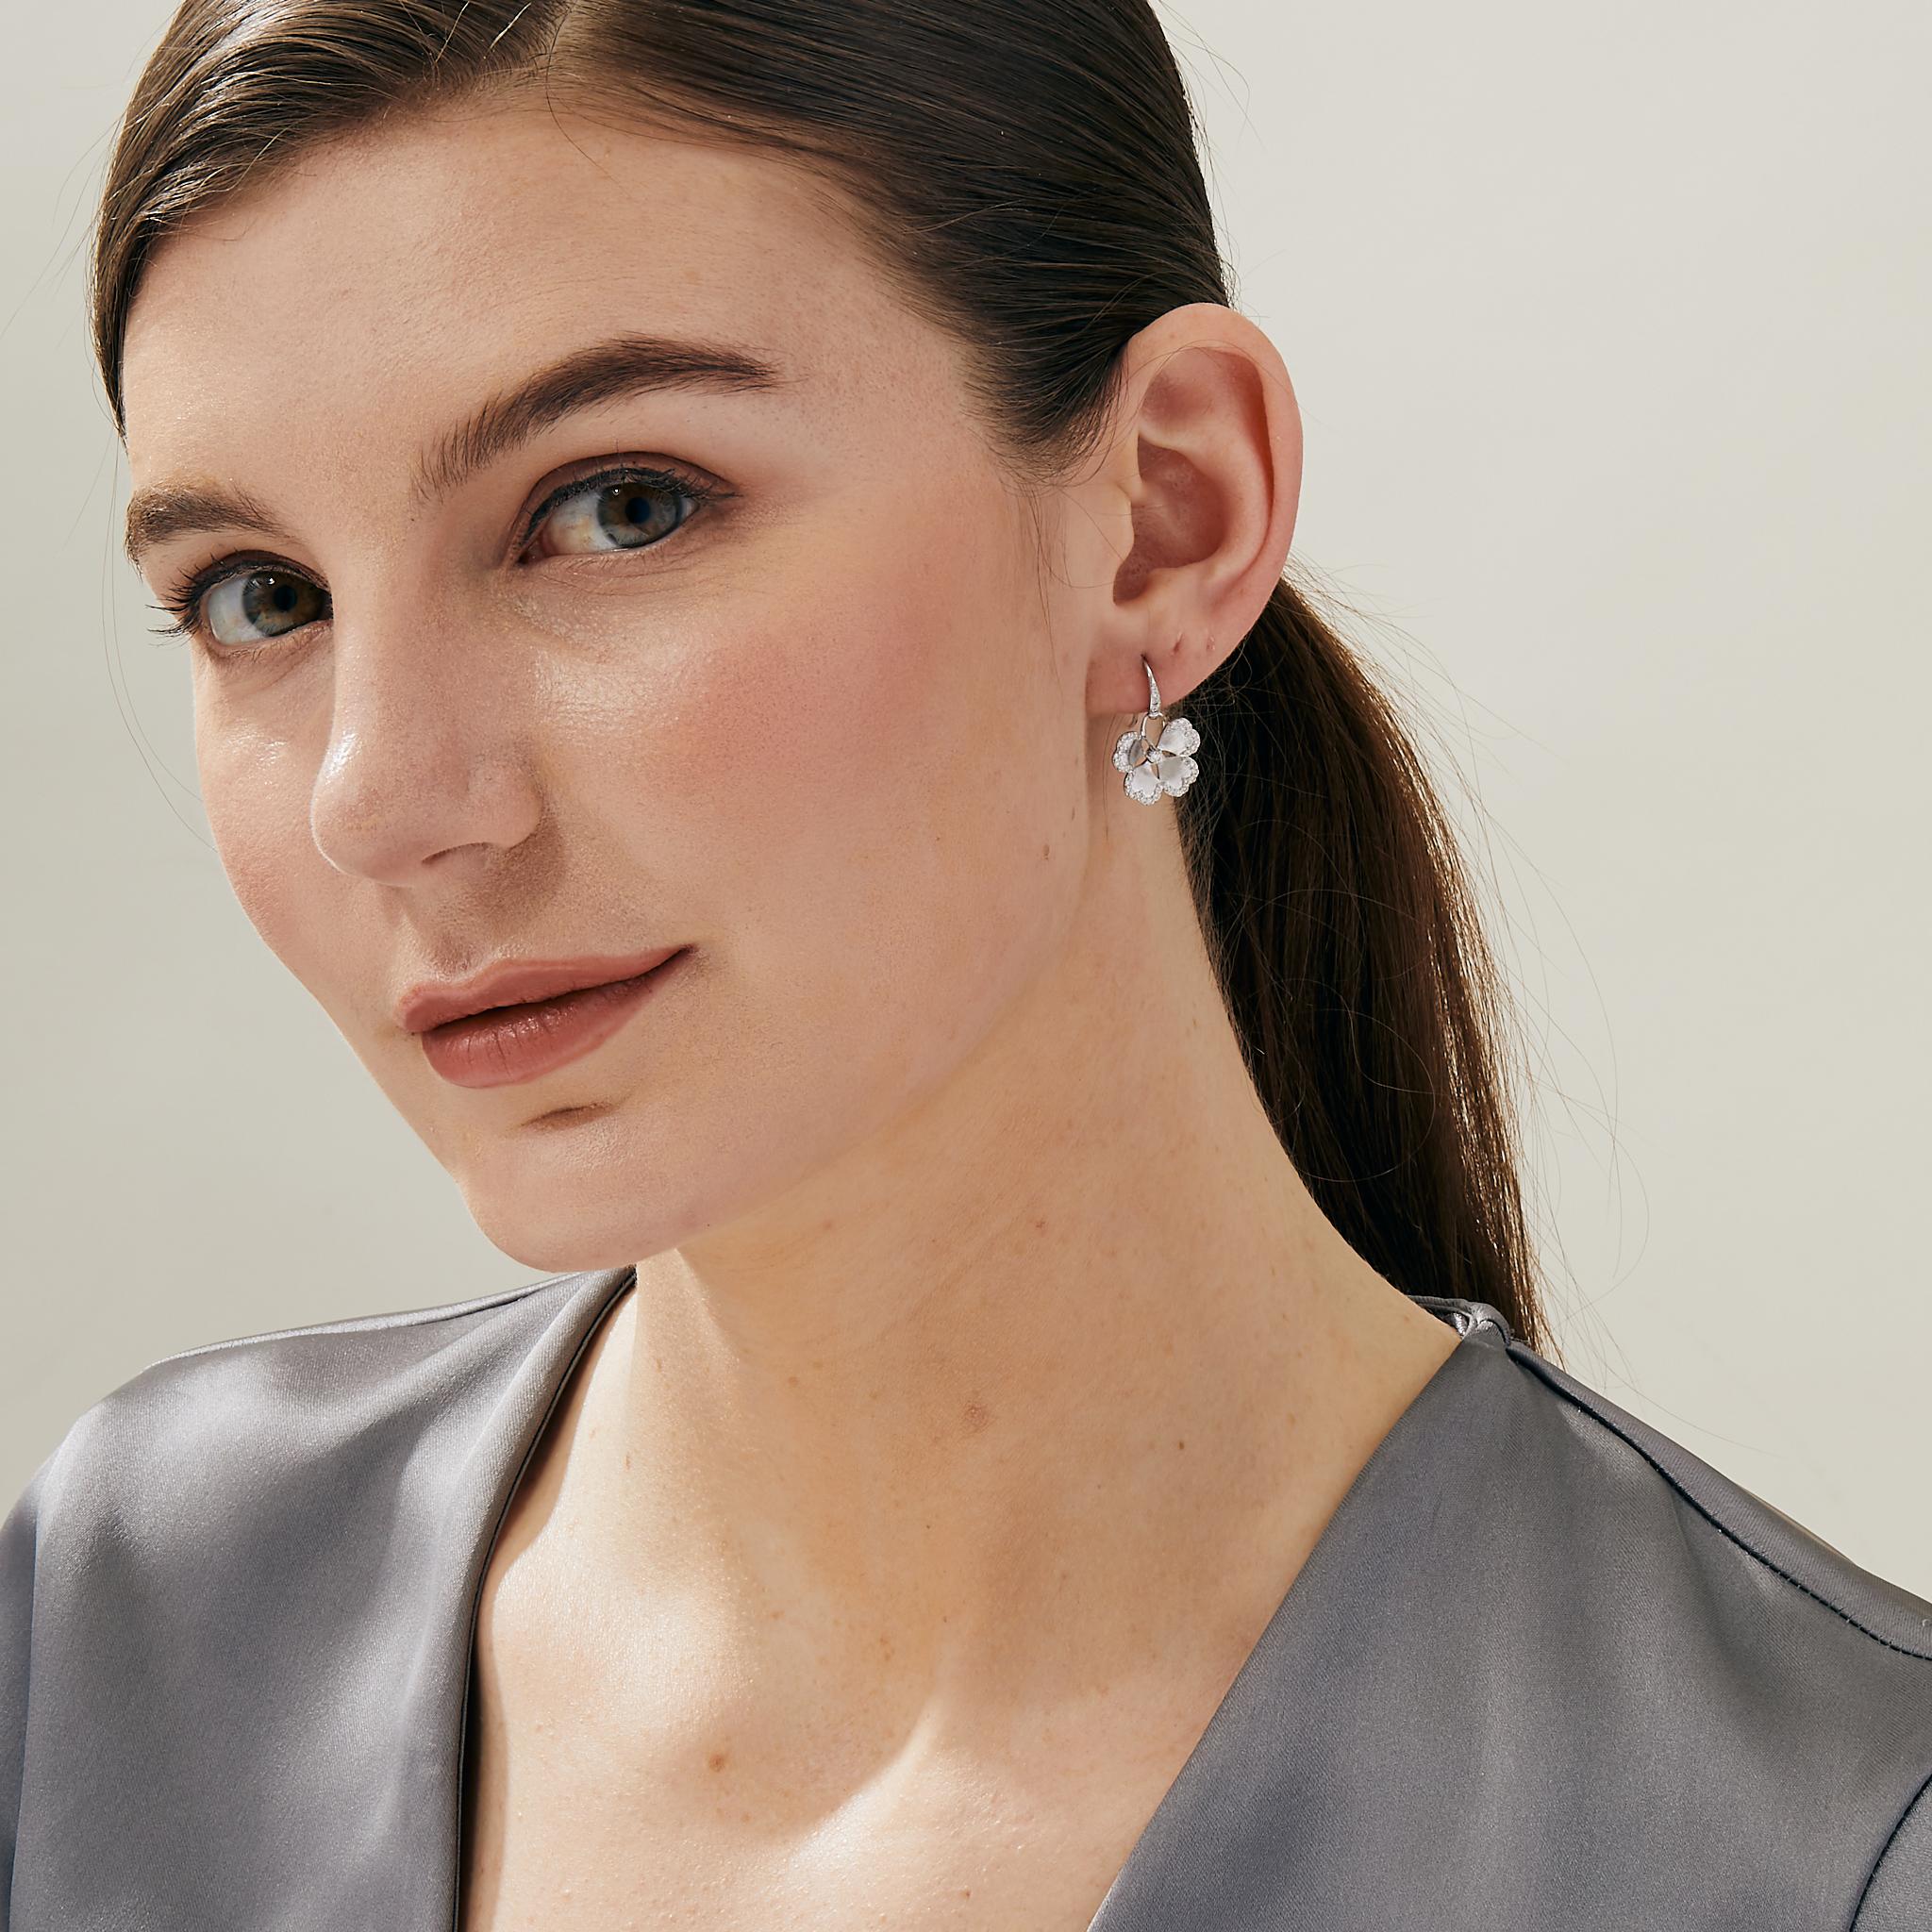 Created in 925 sterling silver
Champagne diamonds 0.45 carat approx.
French wire for pierced ears
Limited edition

Our limited edition Cosmic Gemstone Dangle Earrings are a luxurious addition to any collection. Crafted from 925 sterling silver and